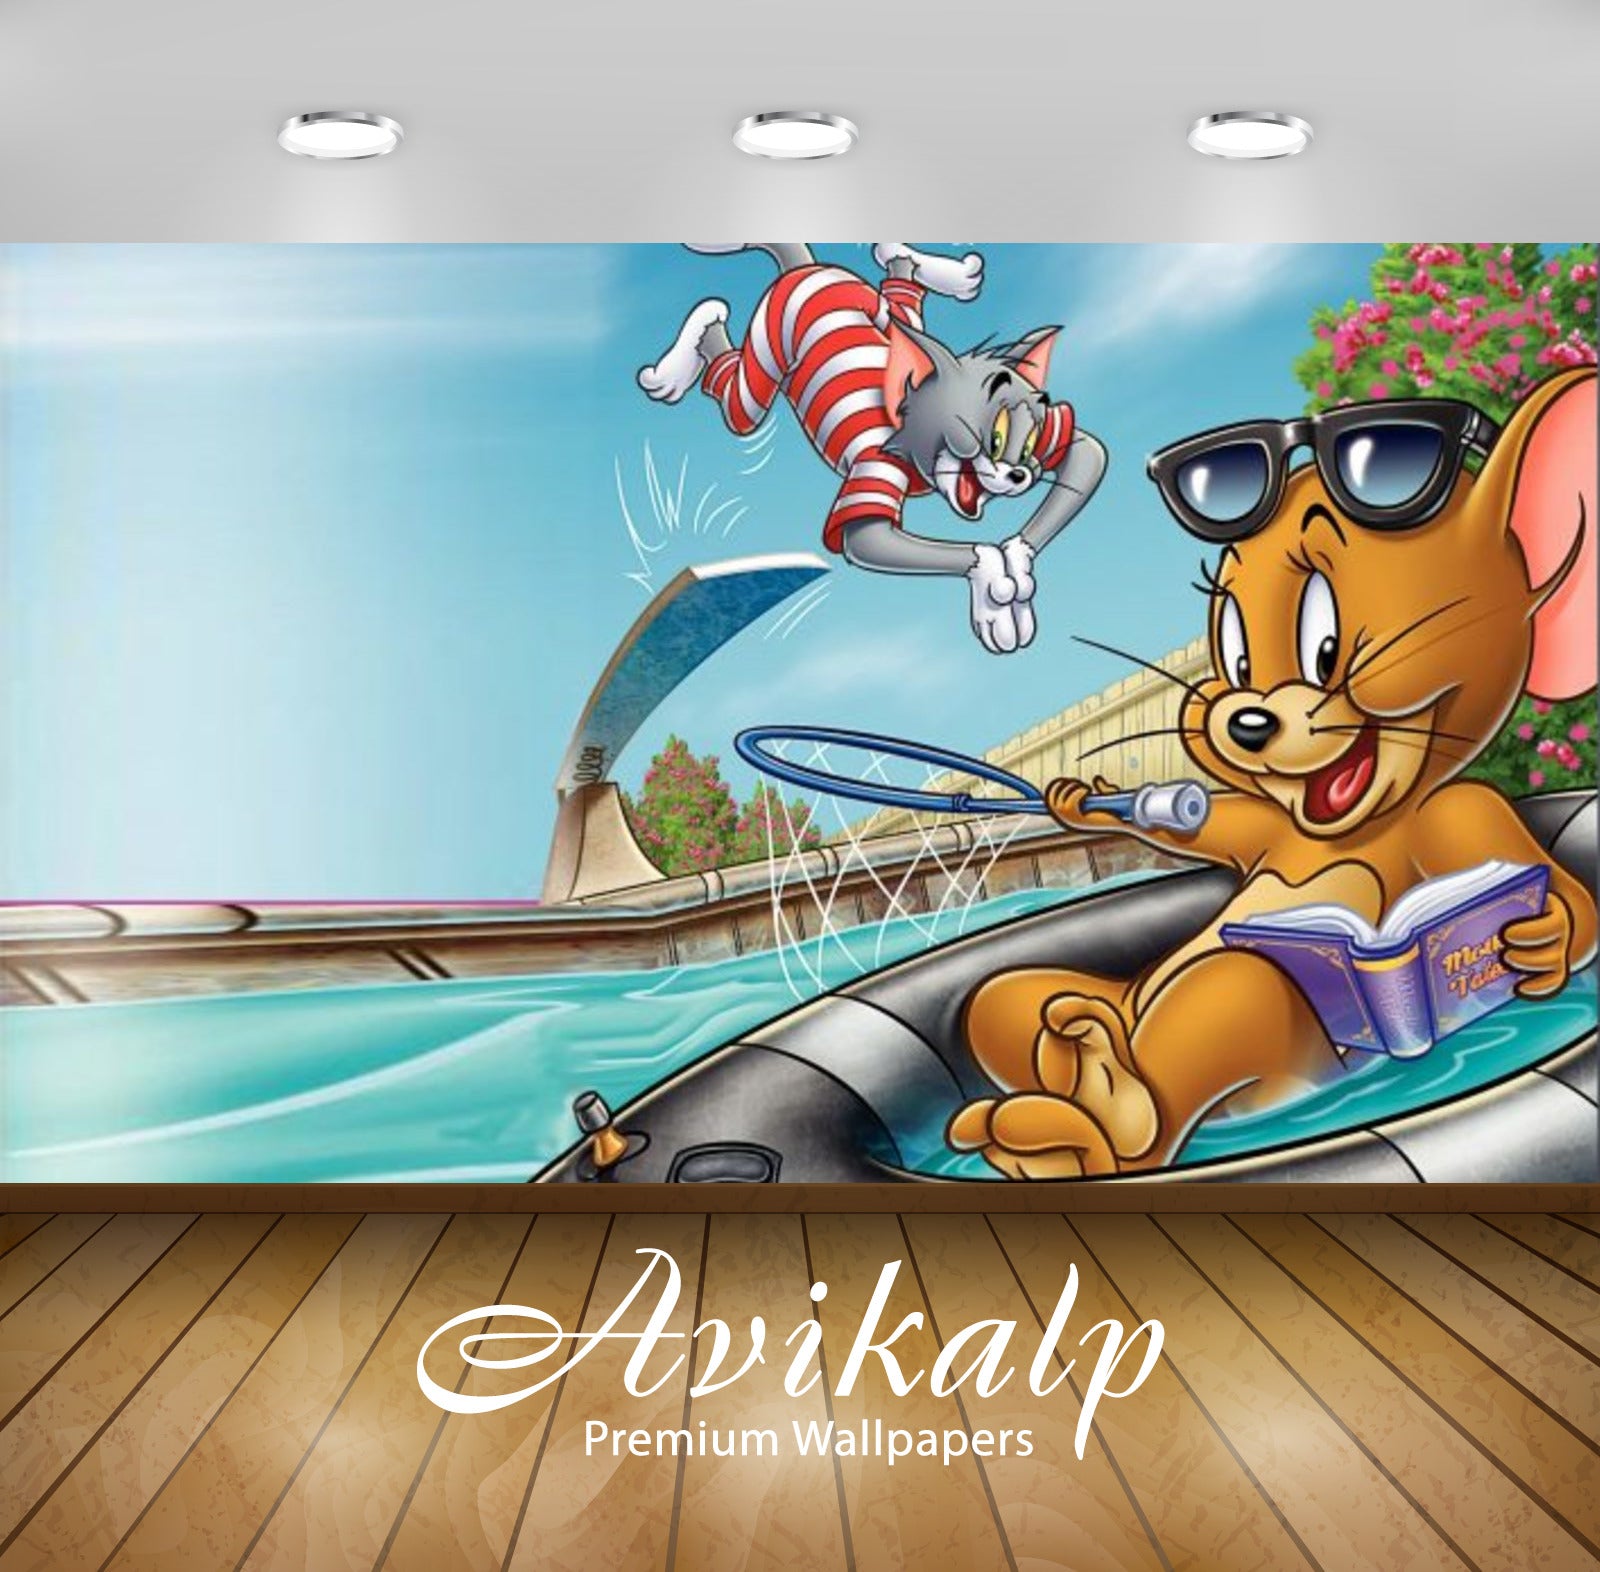 Avikalp Exclusive Awi2262 Tom and Jerry Fur Flying Full HD Wallpapers for Living room, Hall, Kids Ro